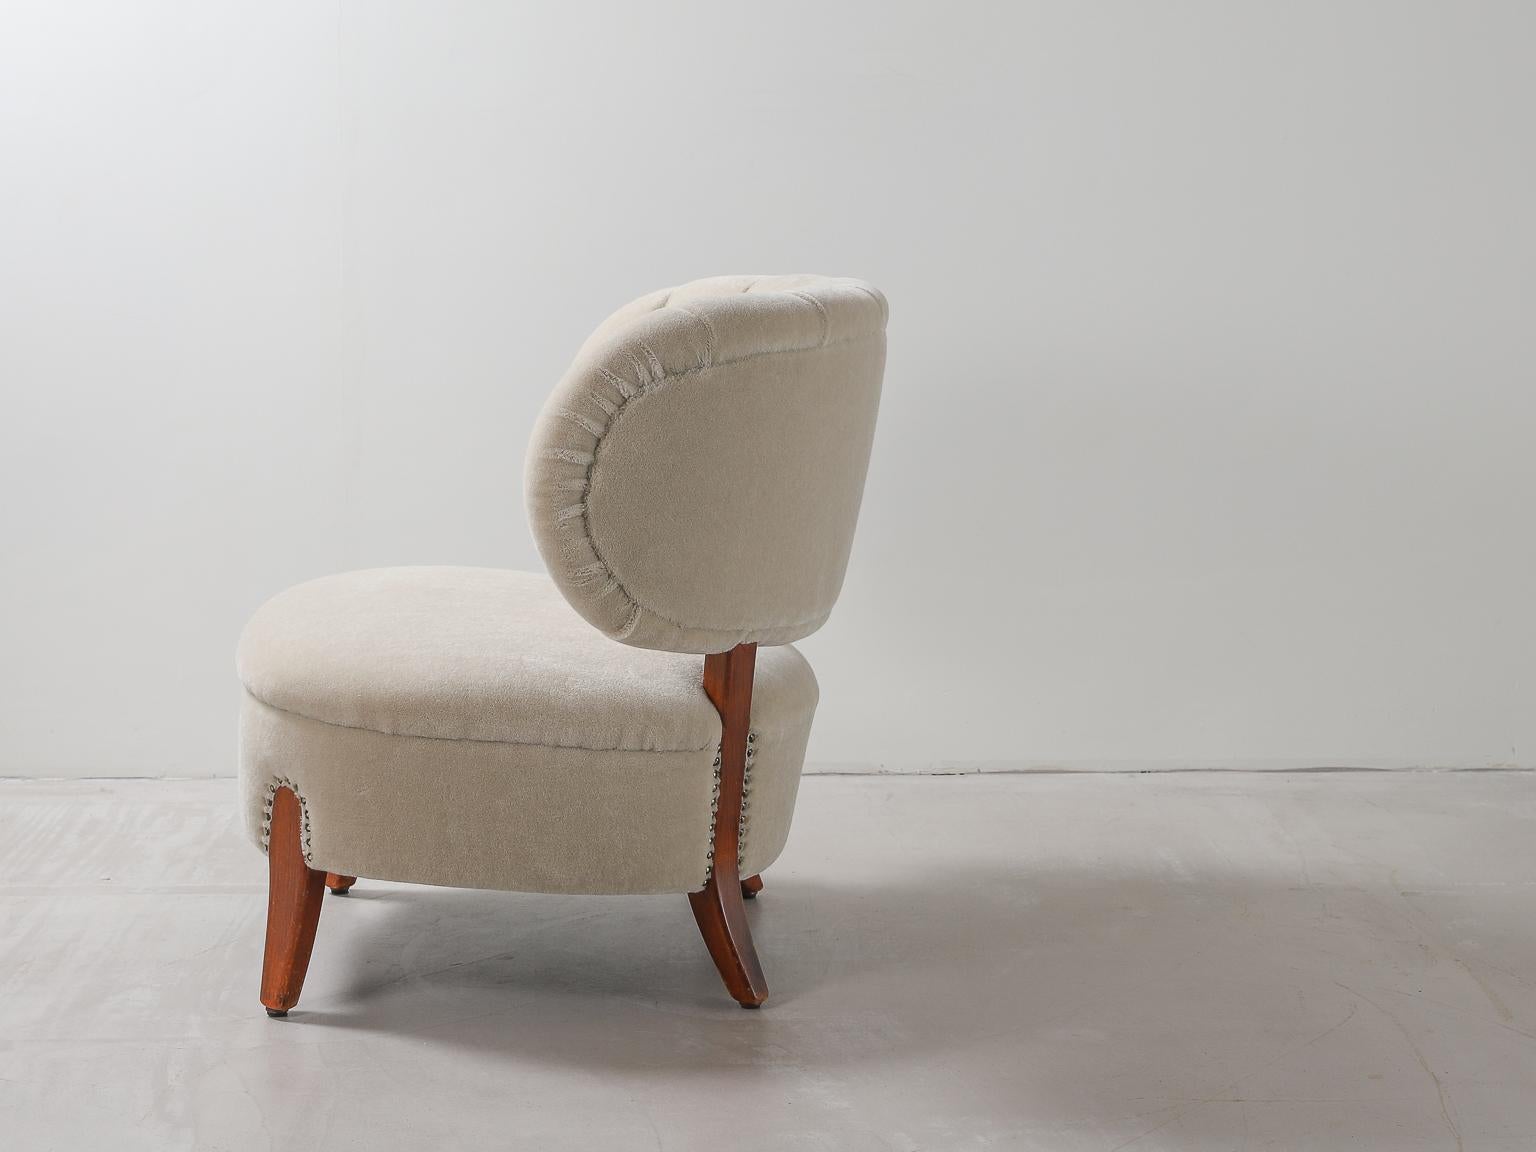 Armchair by Otto Schulz 1930s-1940s Upholstered in Bespoke Mohair In Good Condition In London, Charterhouse Square